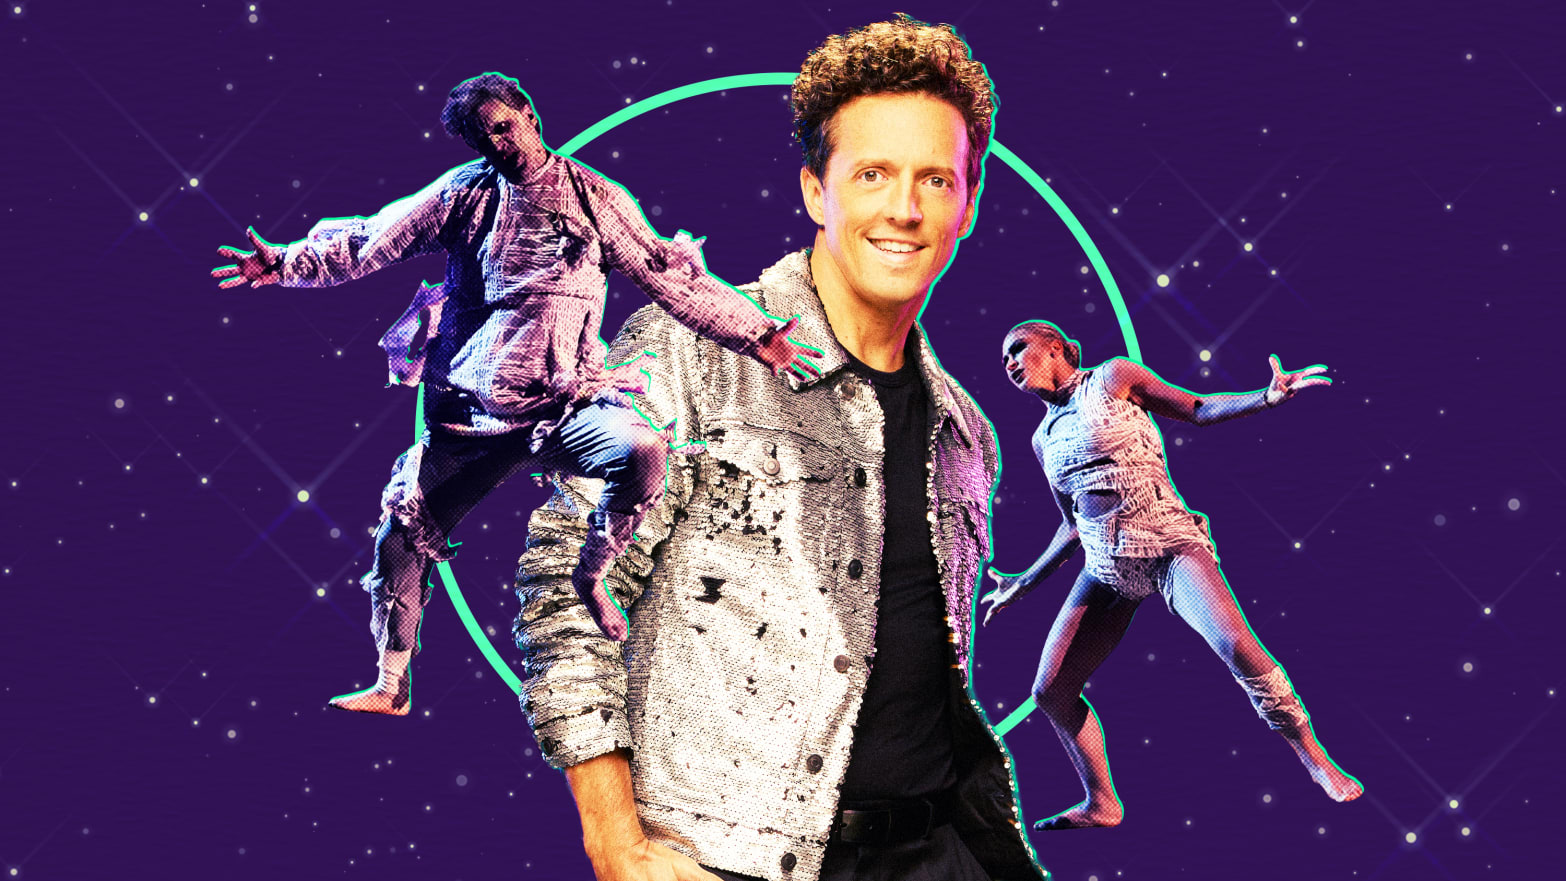 A photo illustration of Jason Mraz on Dancing With The Stars.